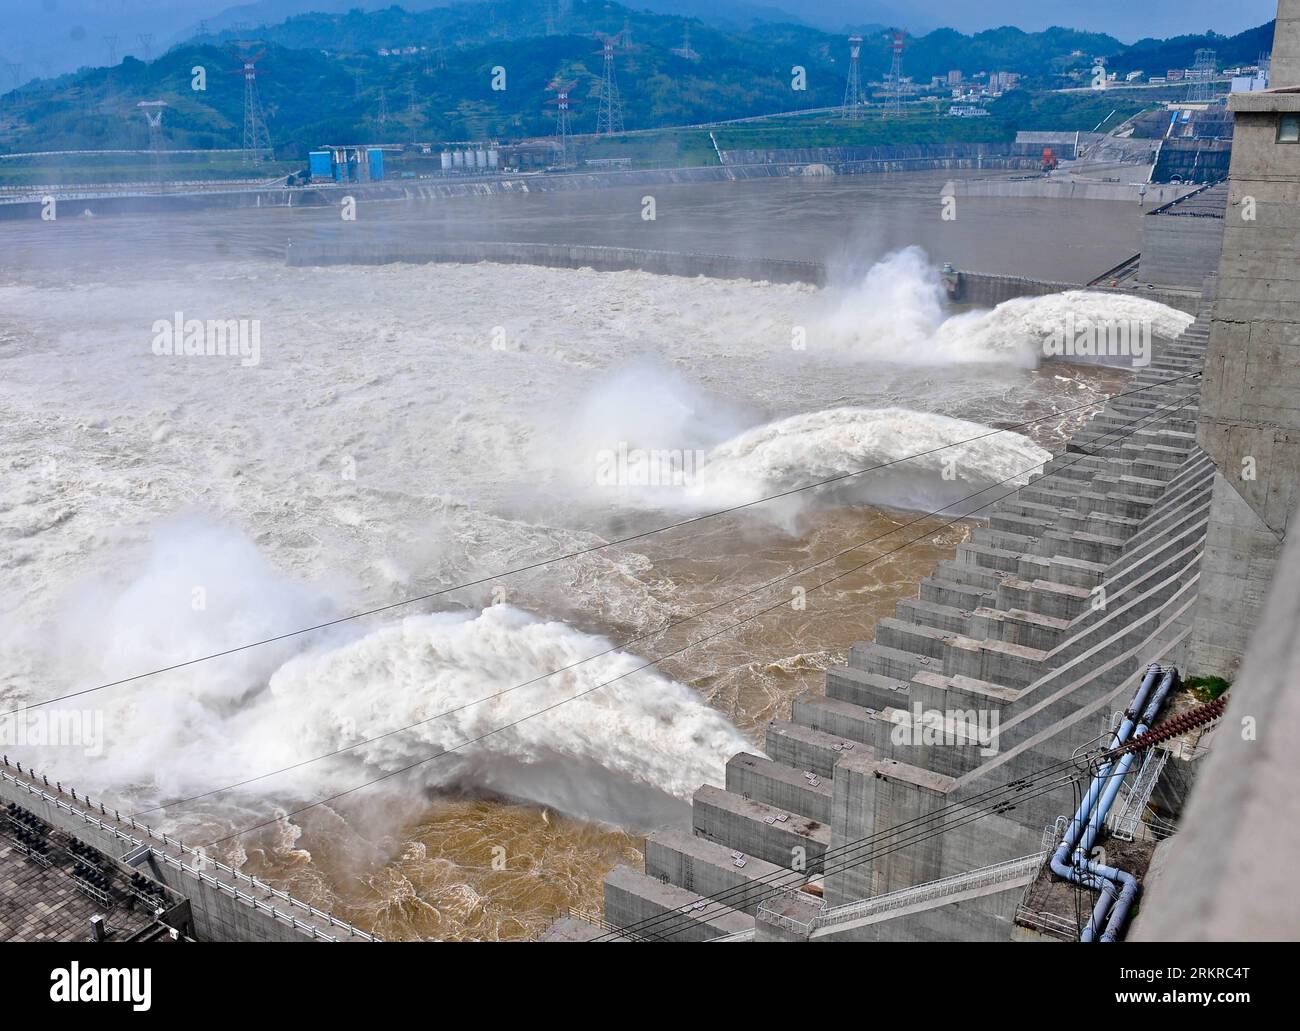 Bildnummer: 58186352  Datum: 04.07.2012  Copyright: imago/Xinhua (120704) -- WUHAN, July 4, 2012 (Xinhua) -- The Three Gorges opens its sluices for water discharge in Yichang, central China s Hubei Province, July 4, 2012. The first flood torrents passed the Three Gorges Dam safely on Wednesday with water flow of the upper Yangtze River dropping to 40,000 cubic meters per second. (Xinhua/Xiao Yijiu) (mp) CHINA-THREE GORGES-FLOOD-PASS (CN) PUBLICATIONxNOTxINxCHN Wirtschaft Versorger Dreischluchtenstaudamm Dreischluchten Staudamm Damm Schleusen offen x0x xjh premiumd 2012 quer Highlight      5818 Stock Photo